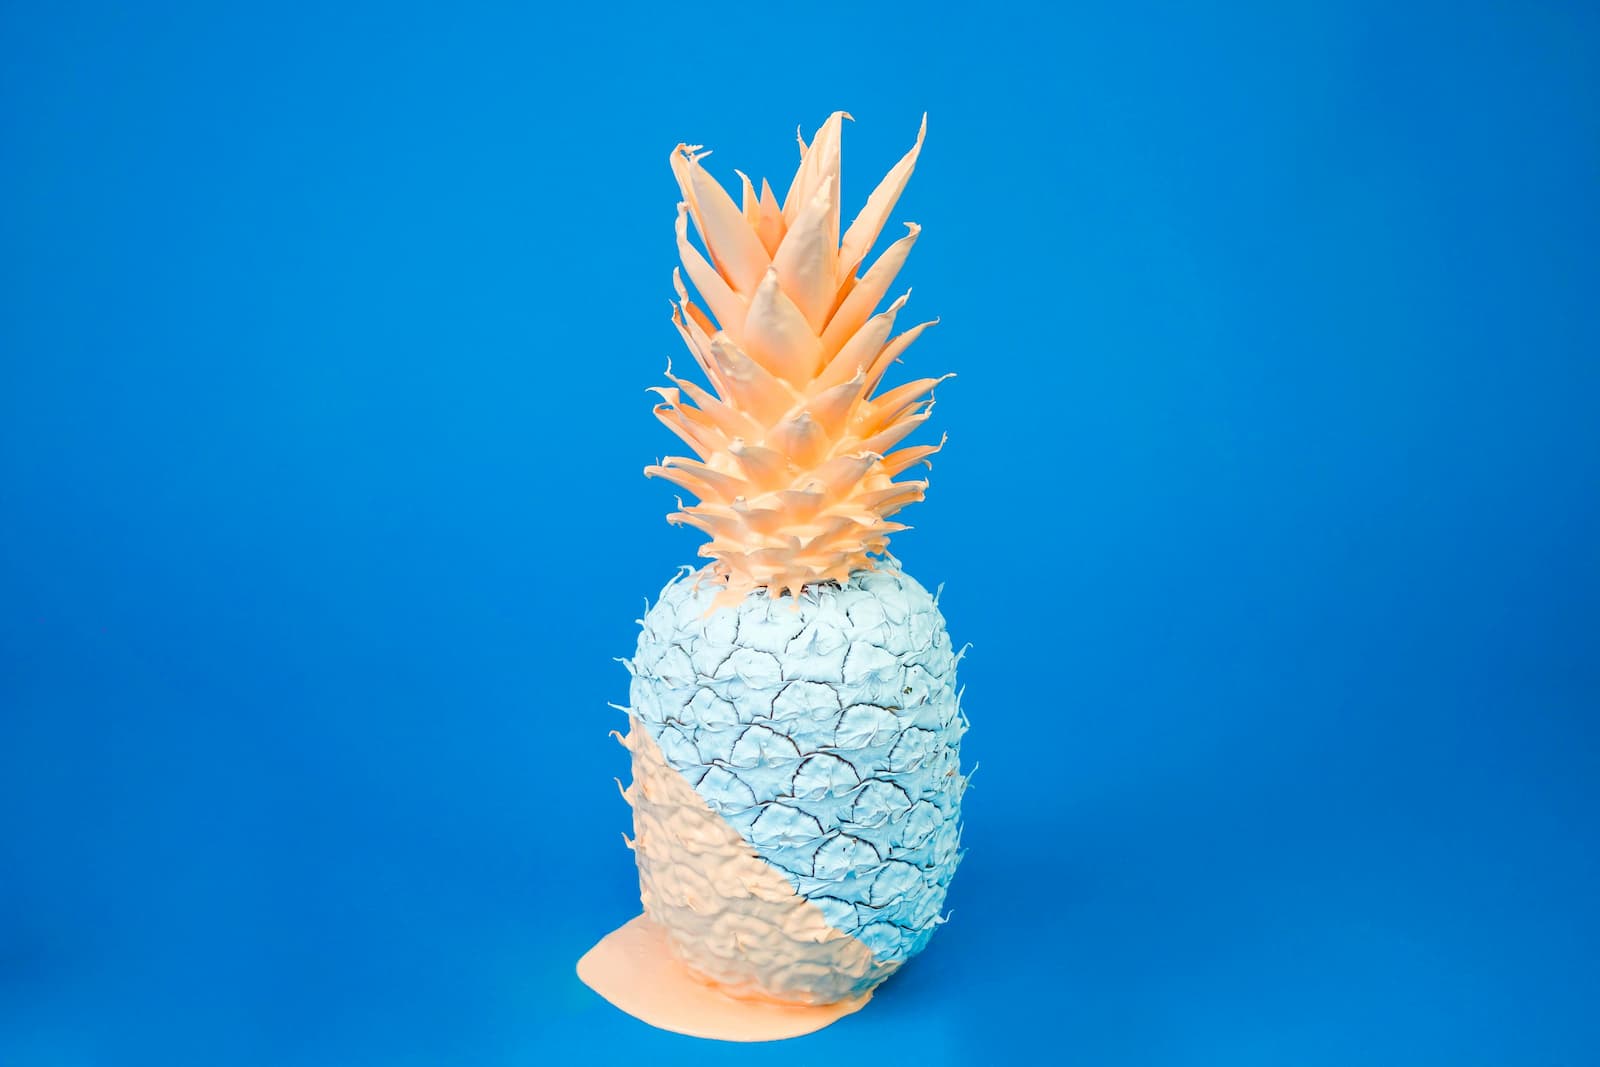 The pineapple is a tropical plant with an edible